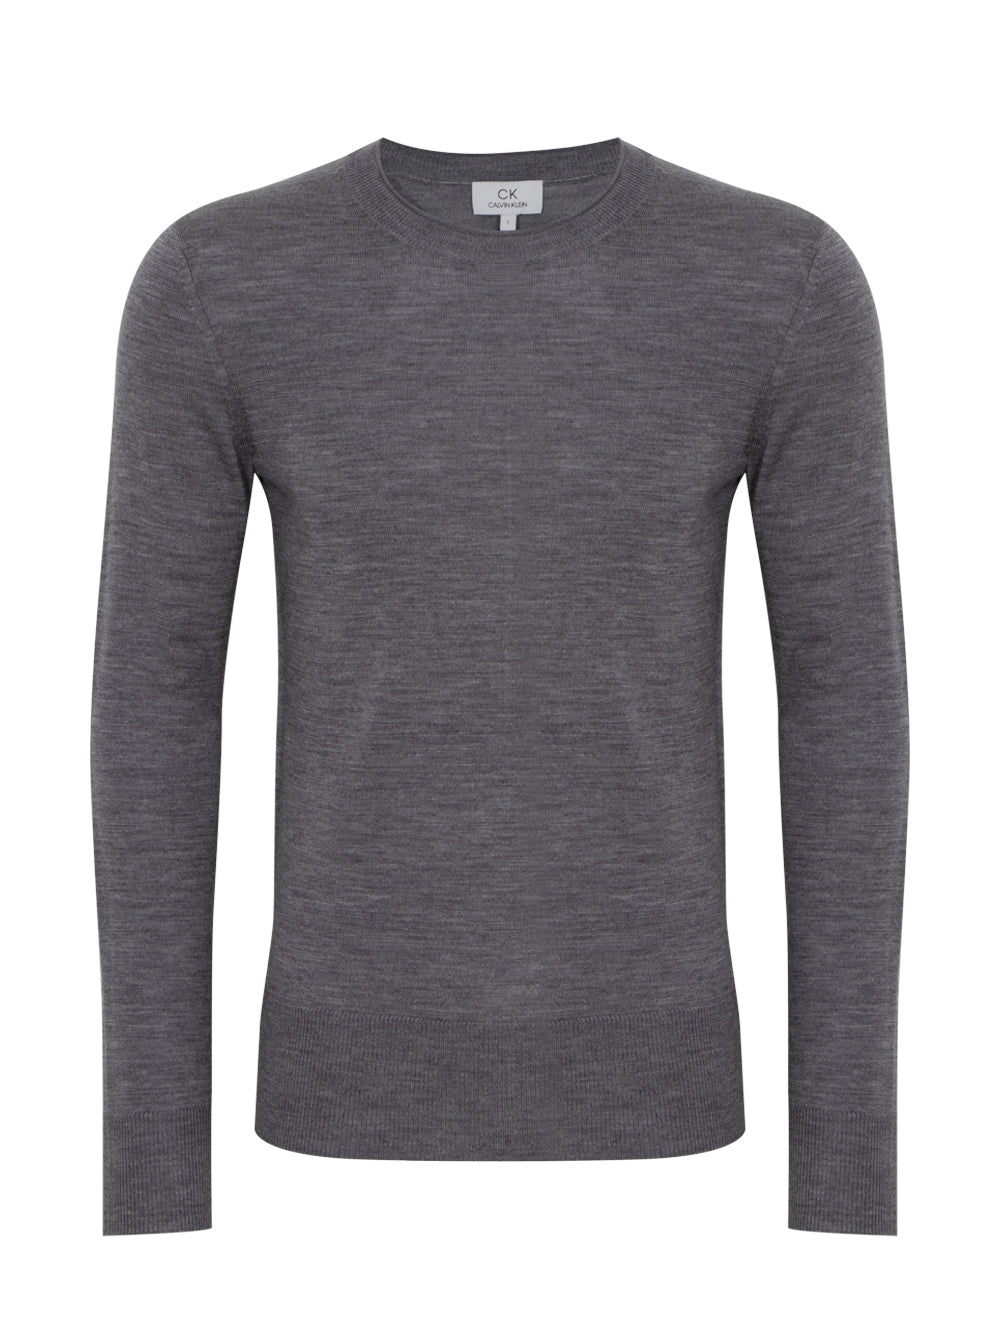 Long Sleeve Rolled Neck (Grey)